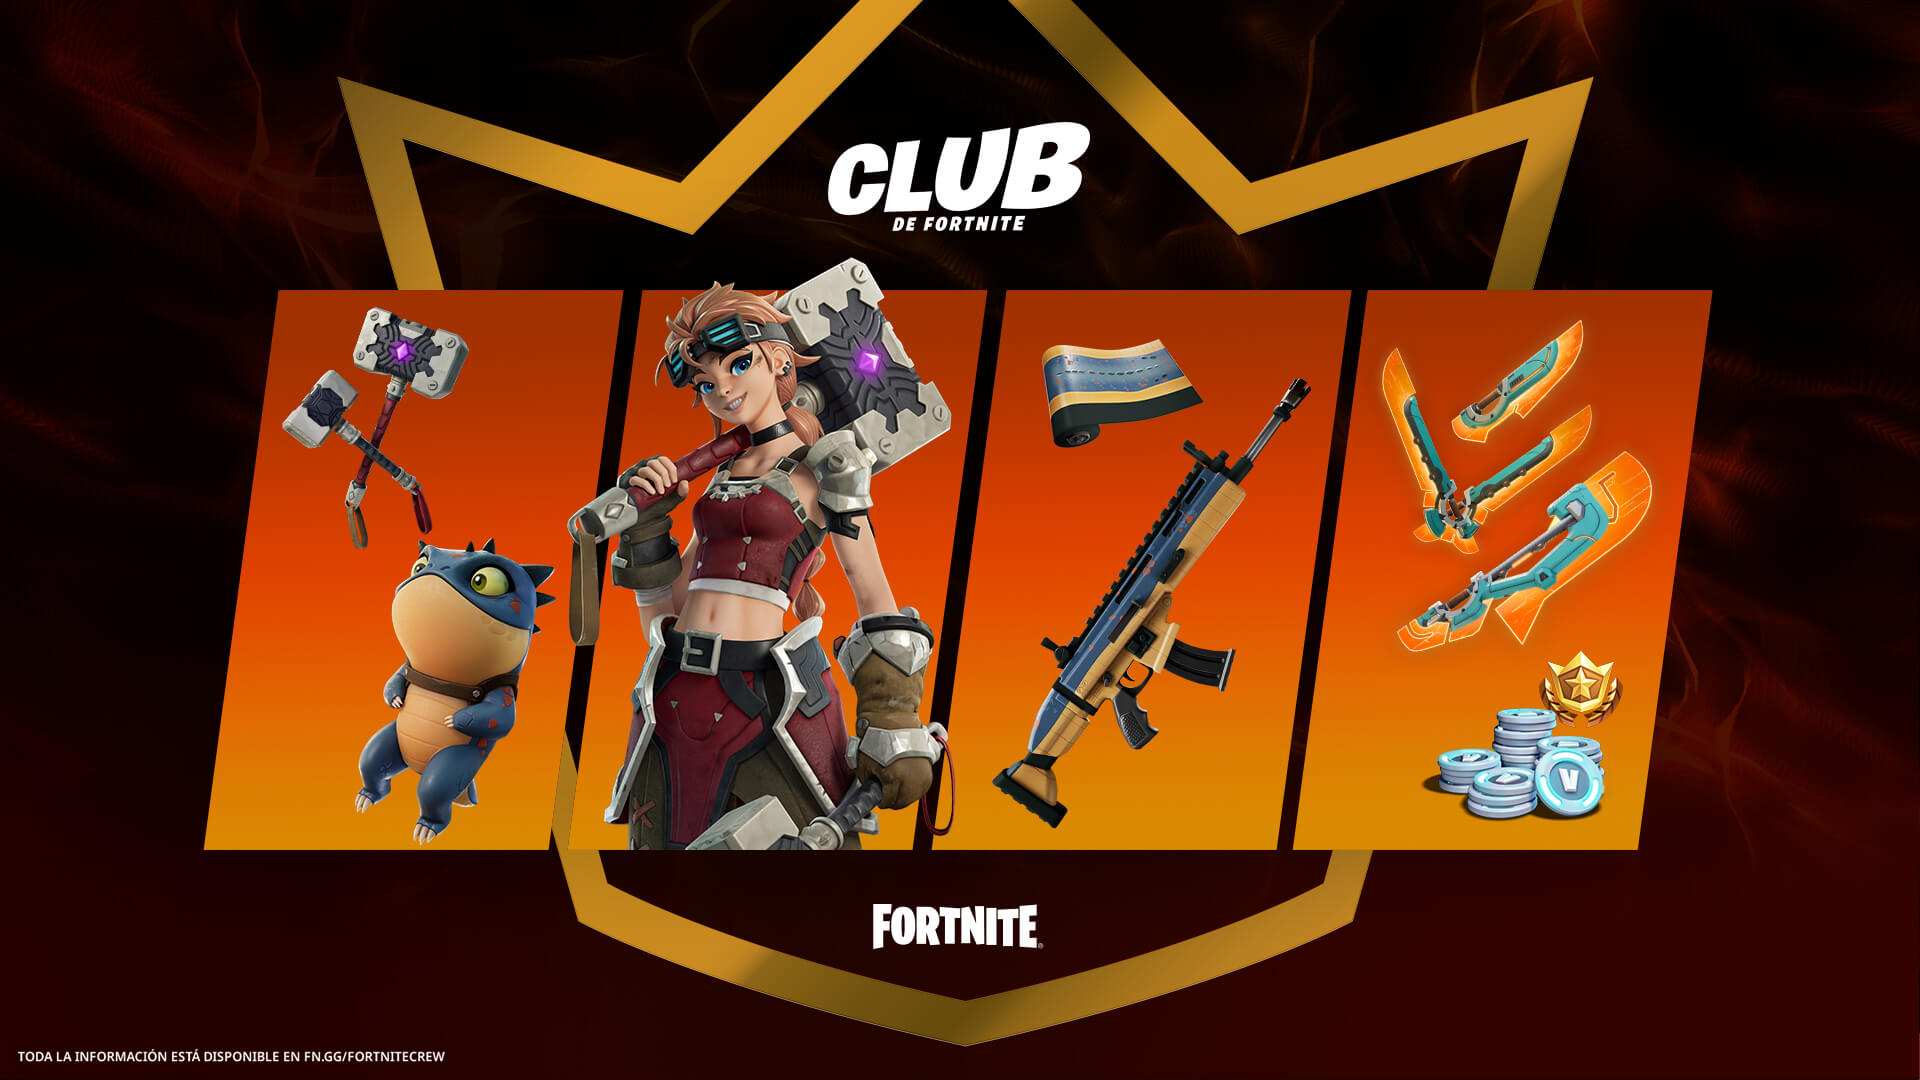 Find out about Sylvie's outfit, the Miraditas backpack and other cosmetics and advantages that you will receive for the Fortnite Club subscription in February 2023.